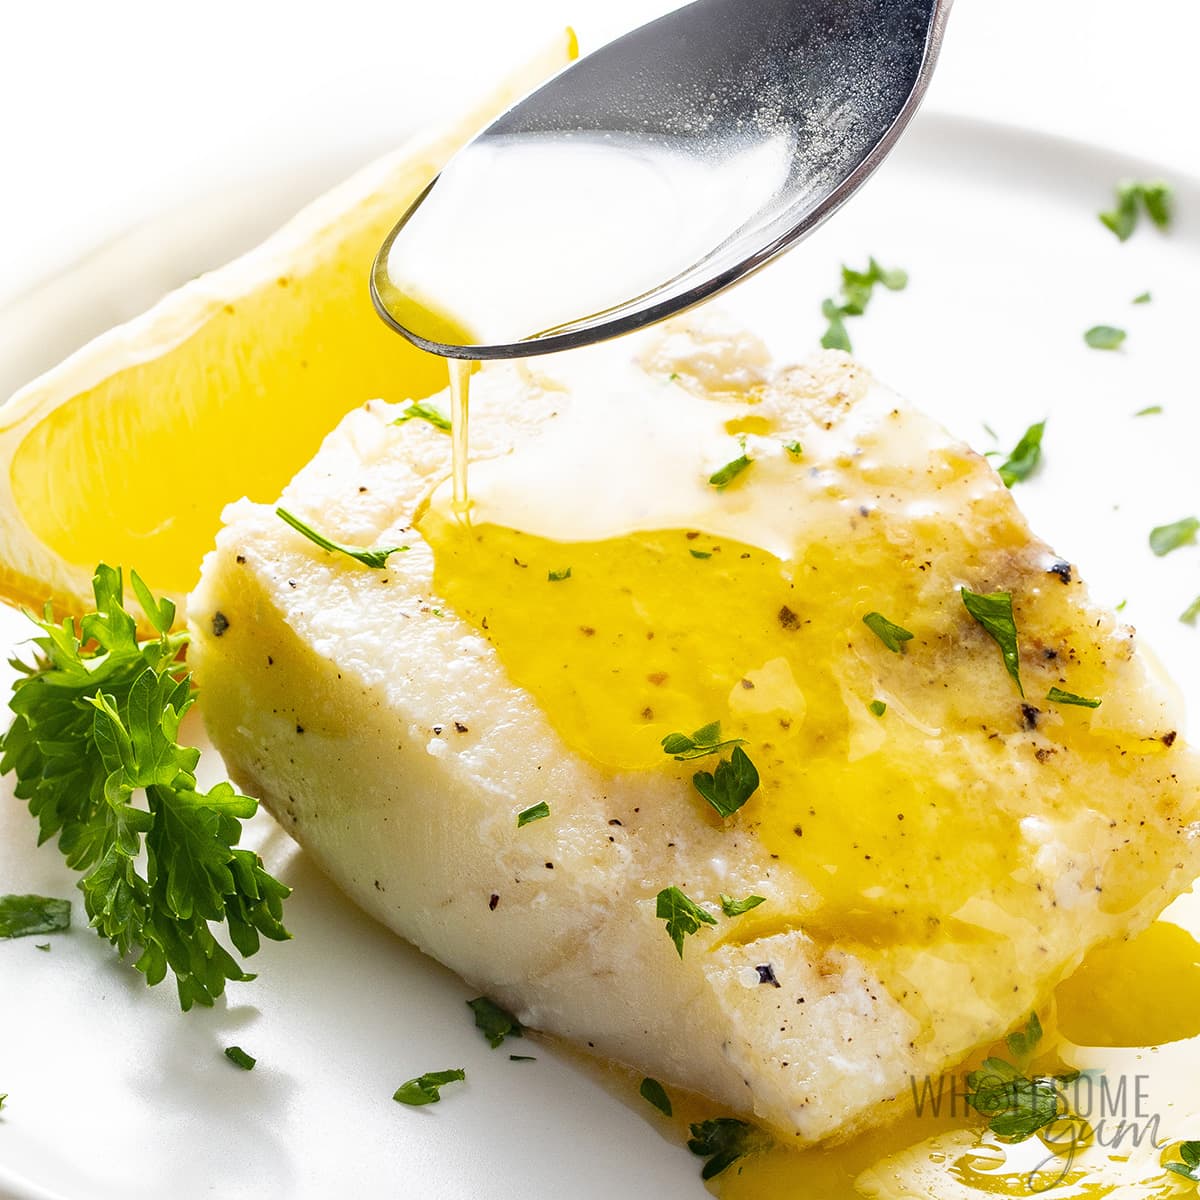 Lemon butter sauce drizzled over fish with a spoon.